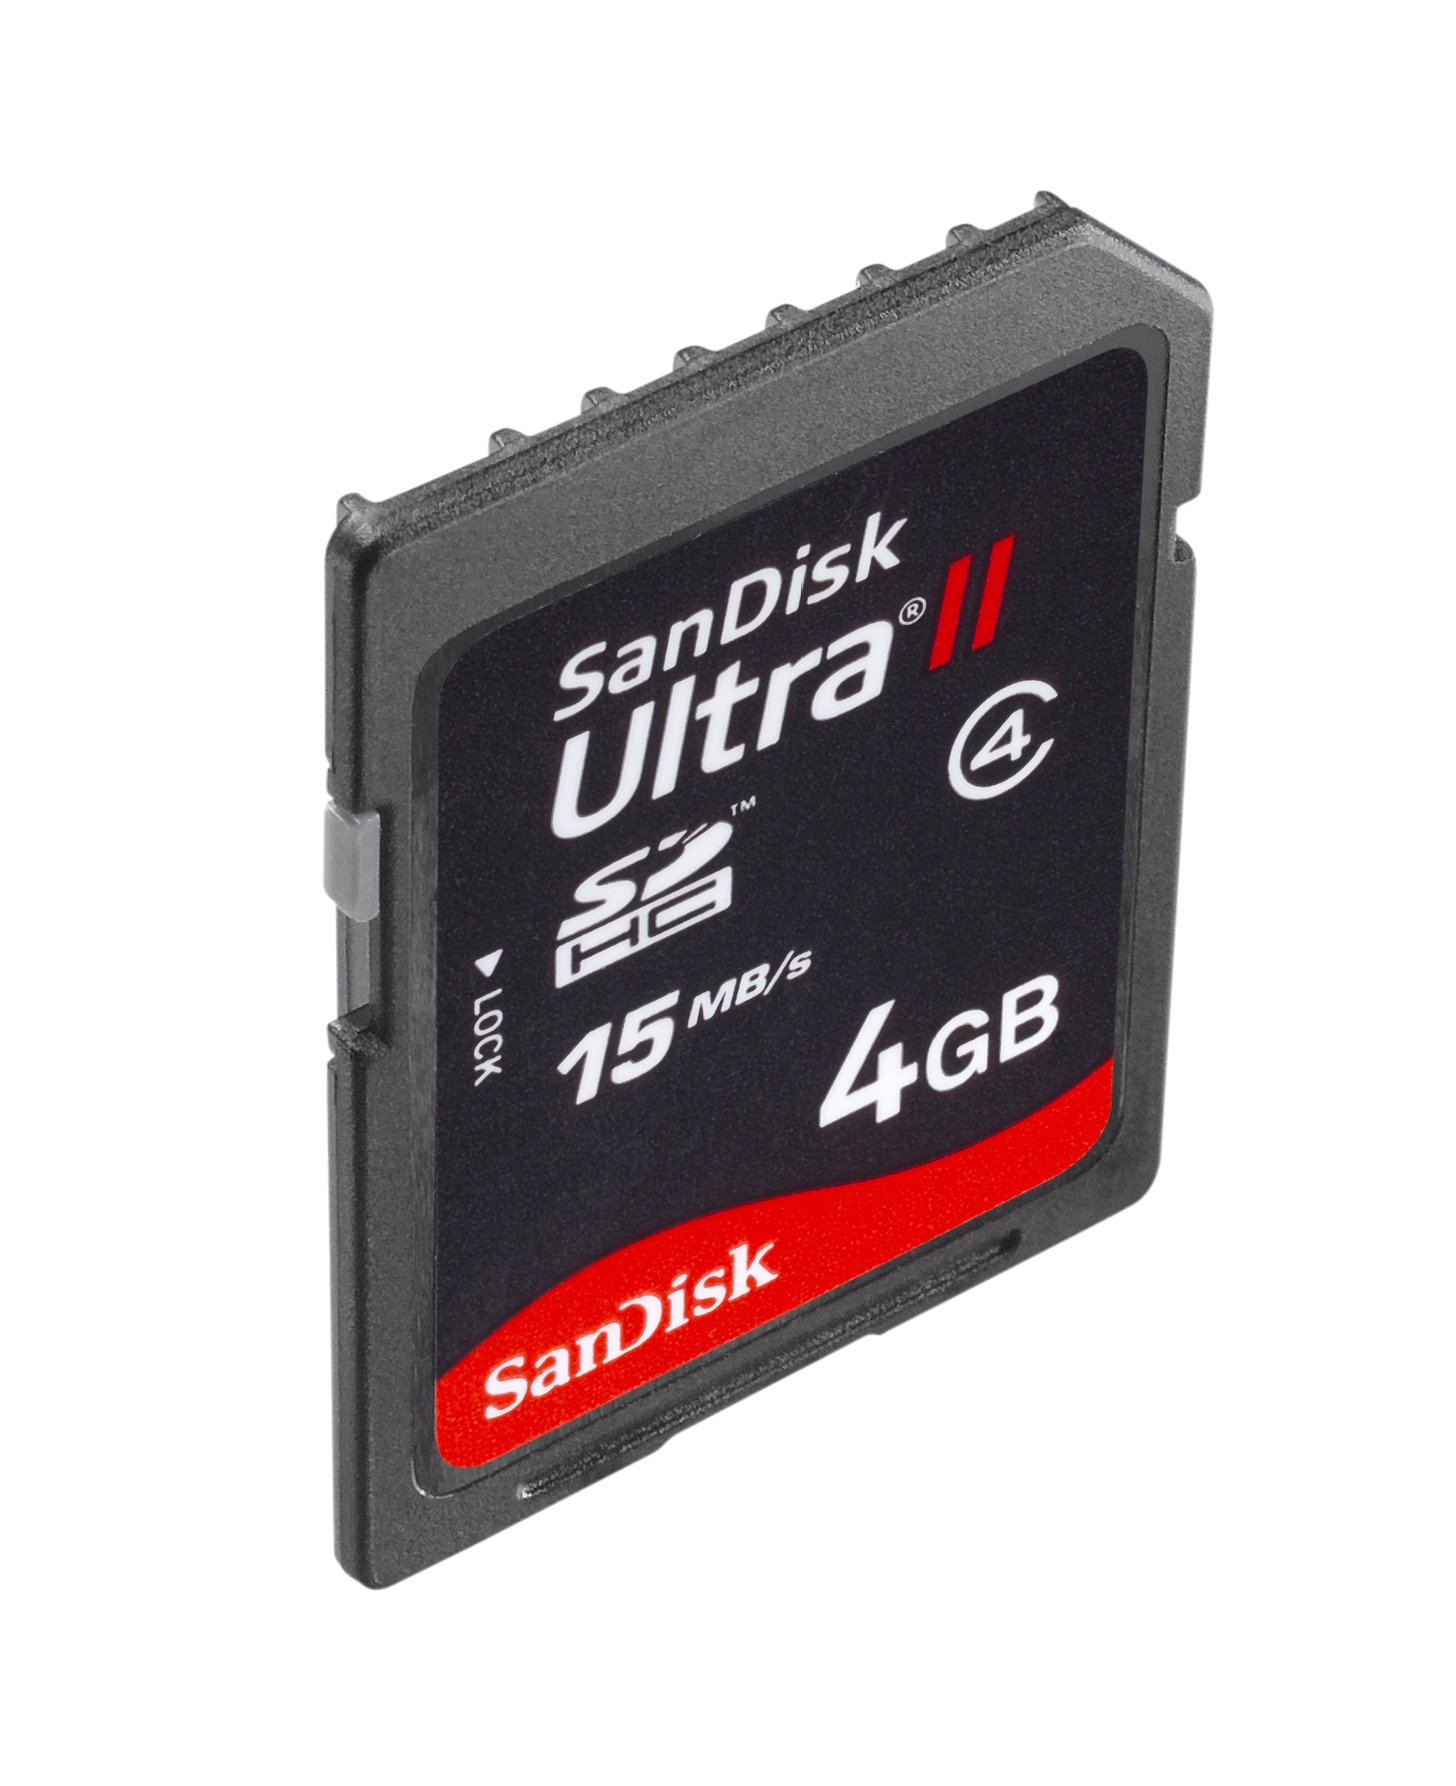 Bendix King 071-00261-0105 SD Card for AV8OR Handheld with GoFly Pacific and GoDrive Australia Databases